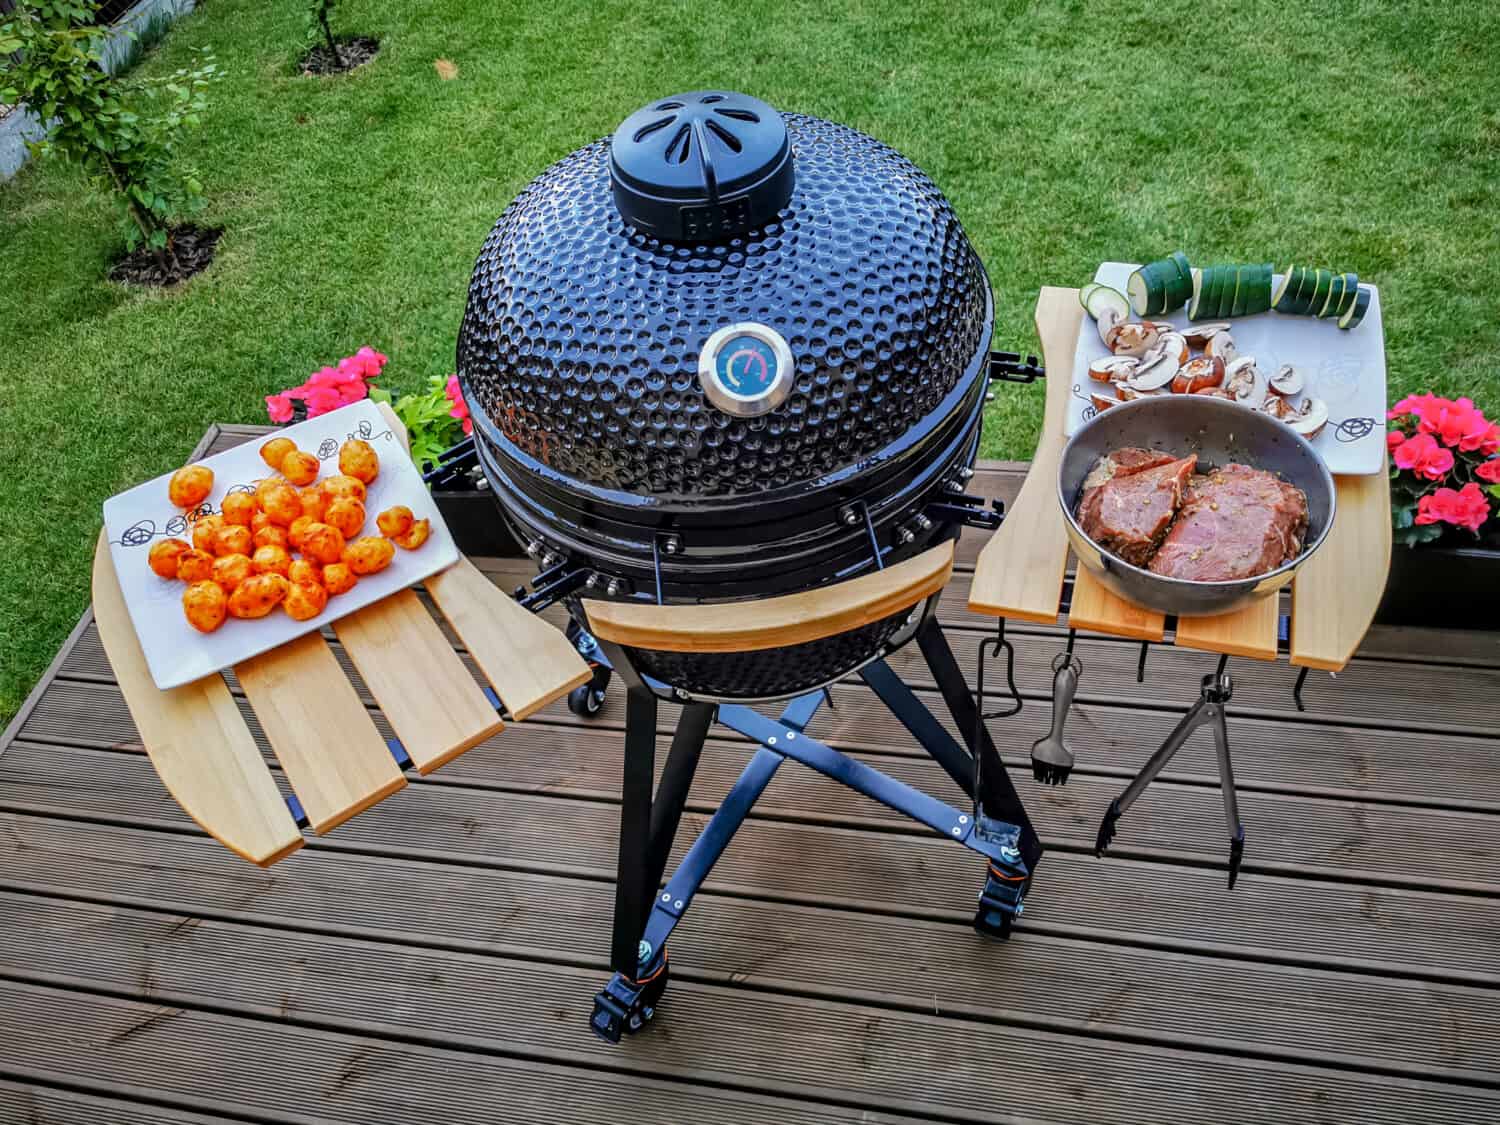 A kamado egg type barbeque grill standing on a living house terrace with beef steaks and vegetables to be cooked.